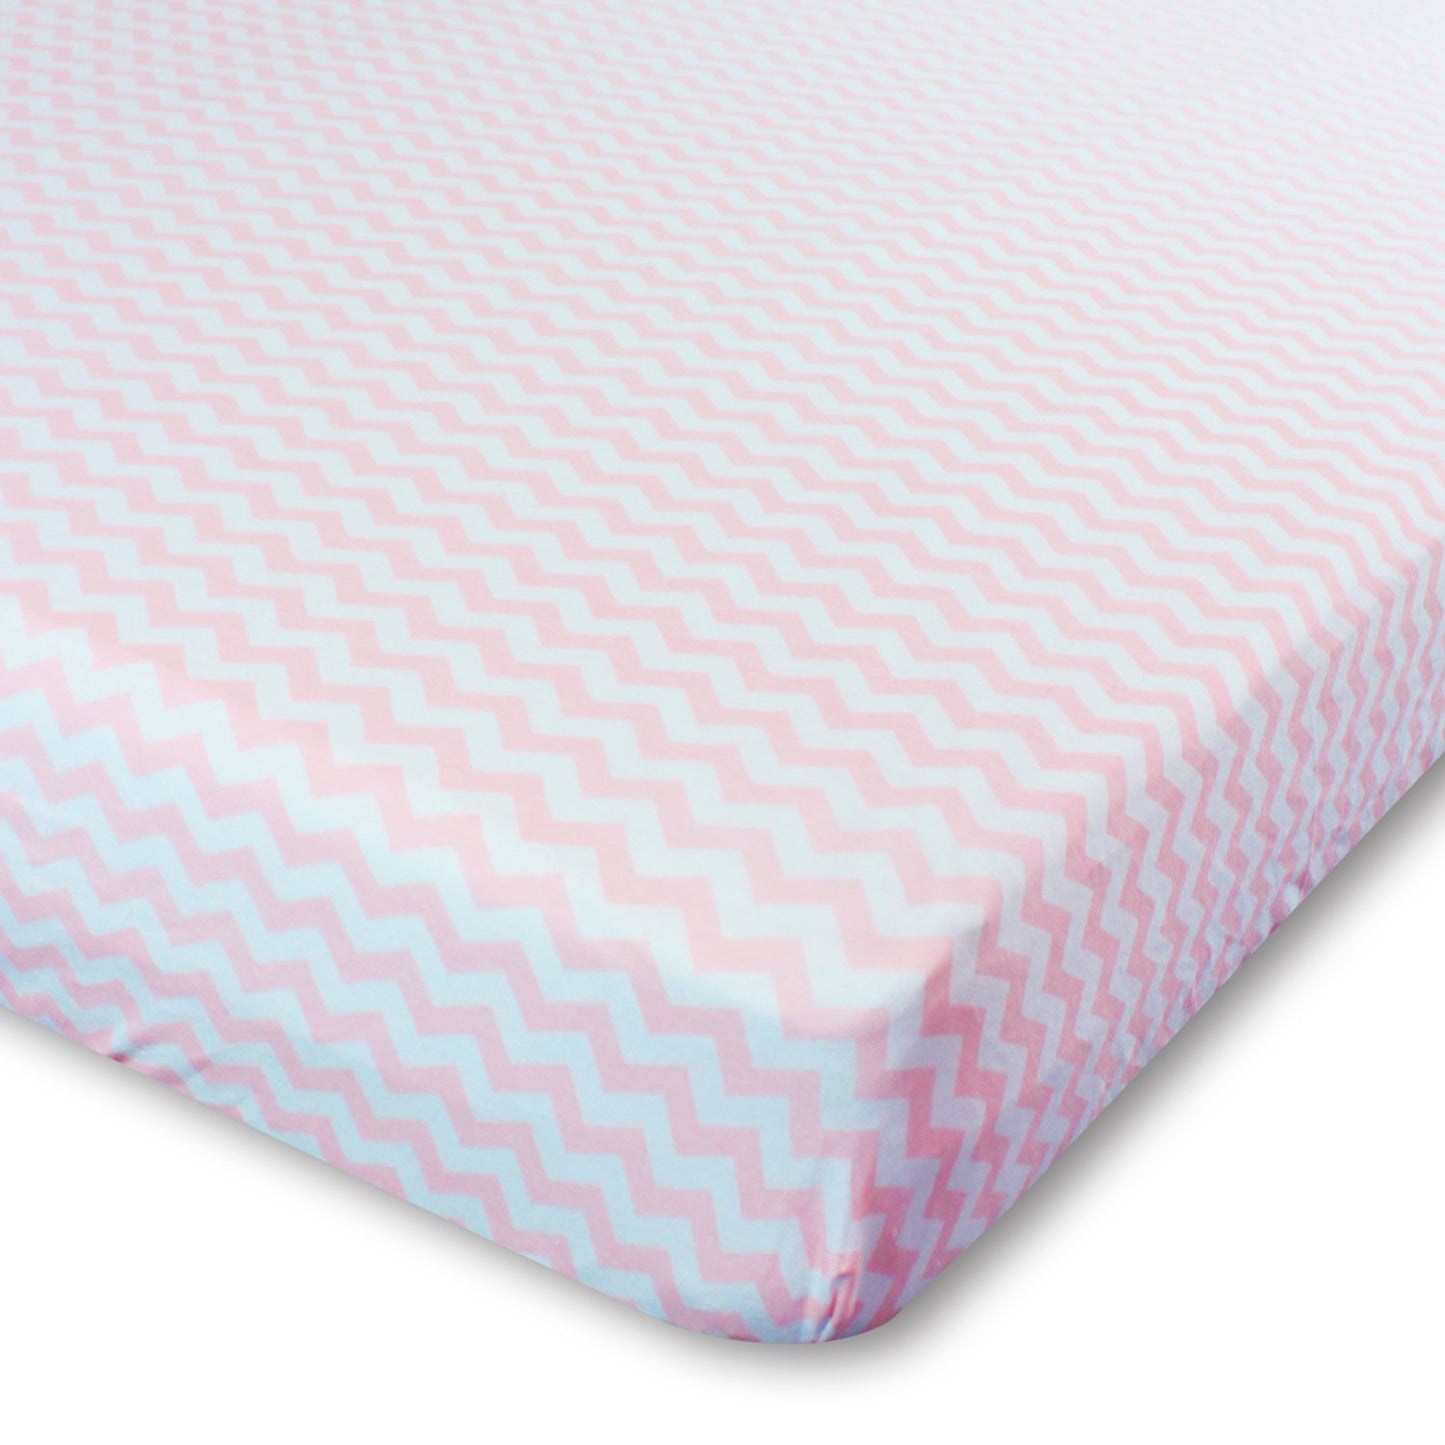 Toddler Bedding Fitted Jersey Cotton (2 Pack) Pink Polka Dot, Chevron